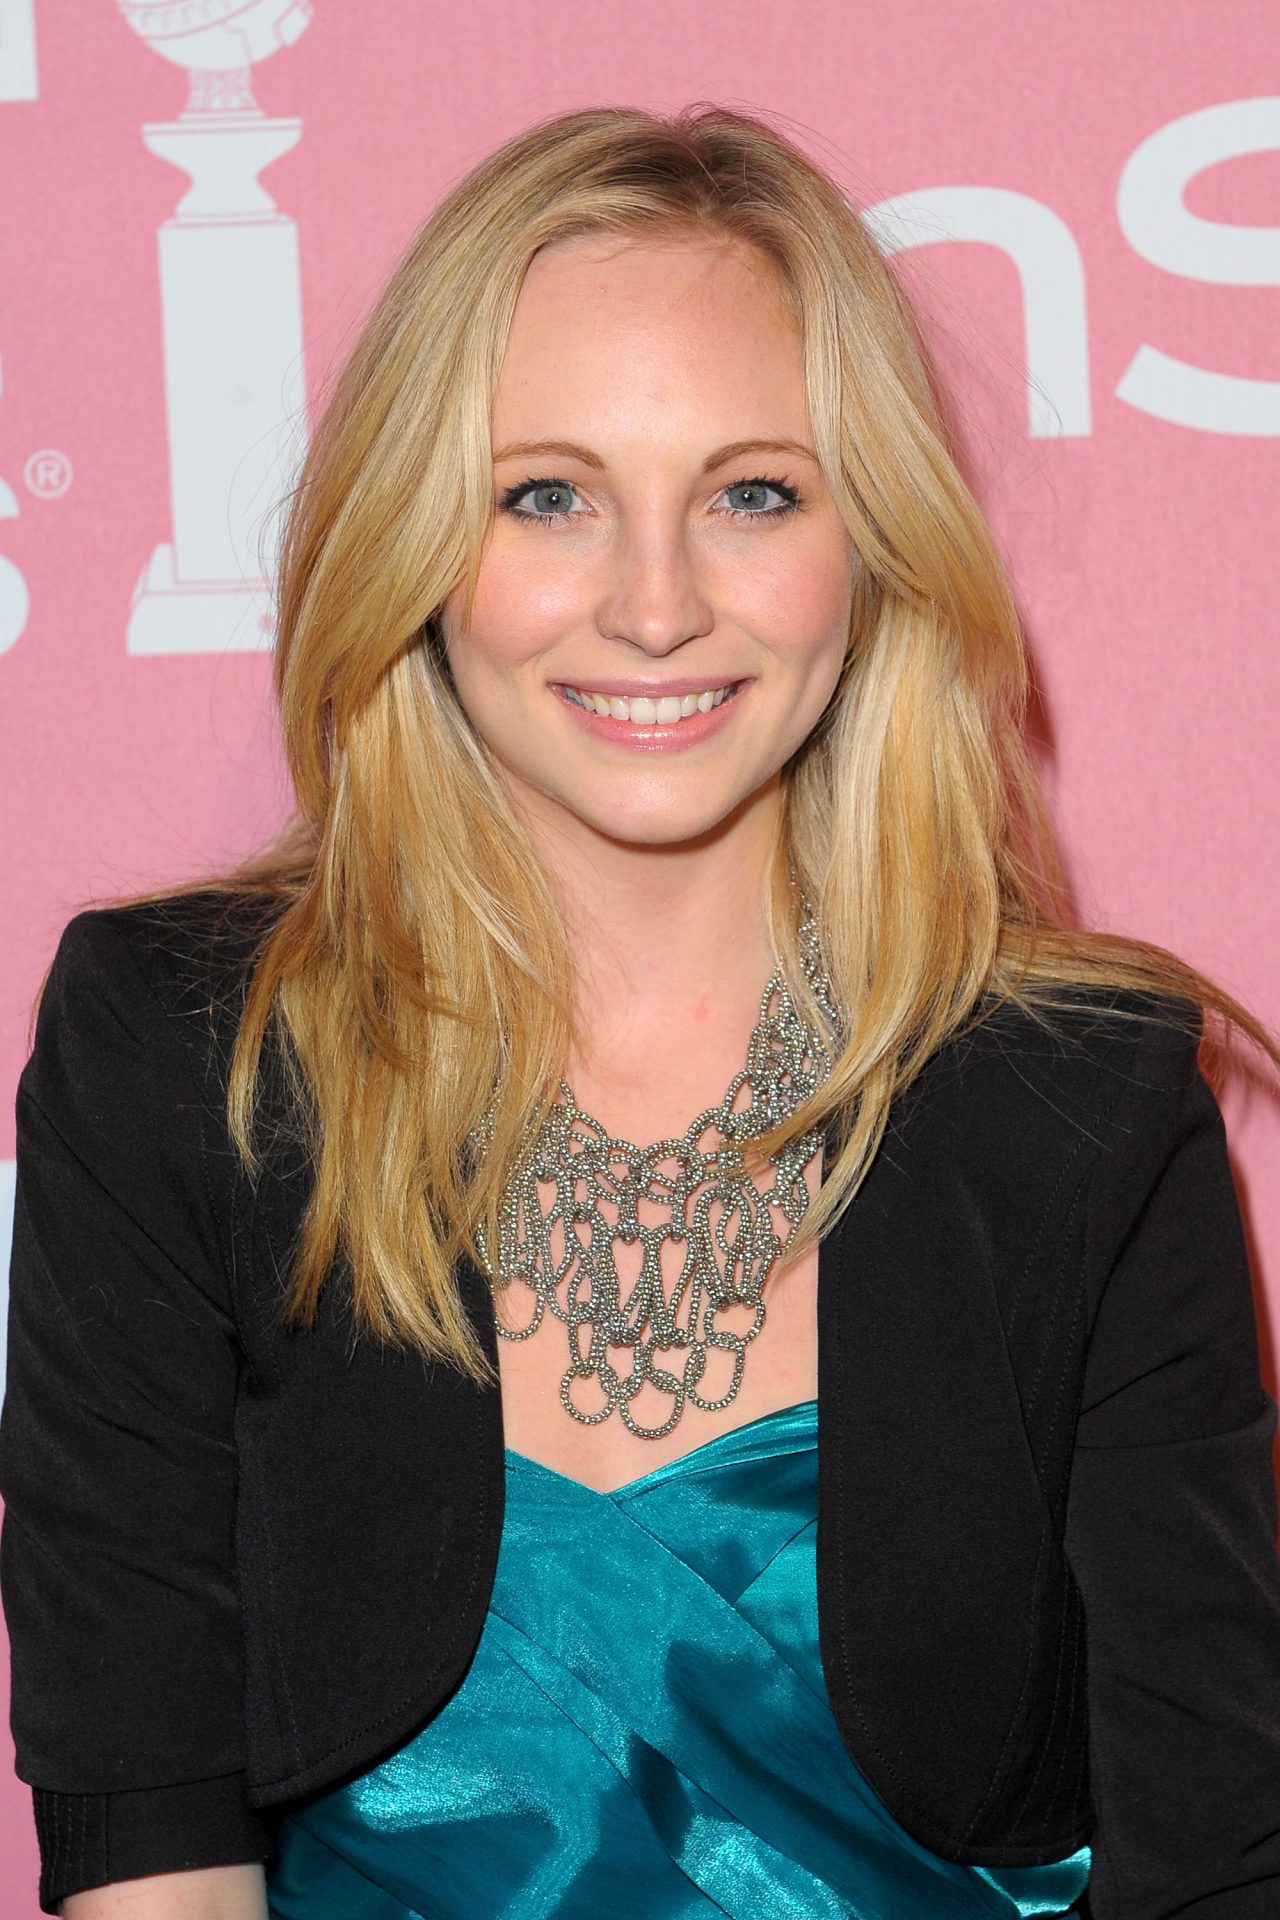 Candice Accola in 'The Vampire Diaries'